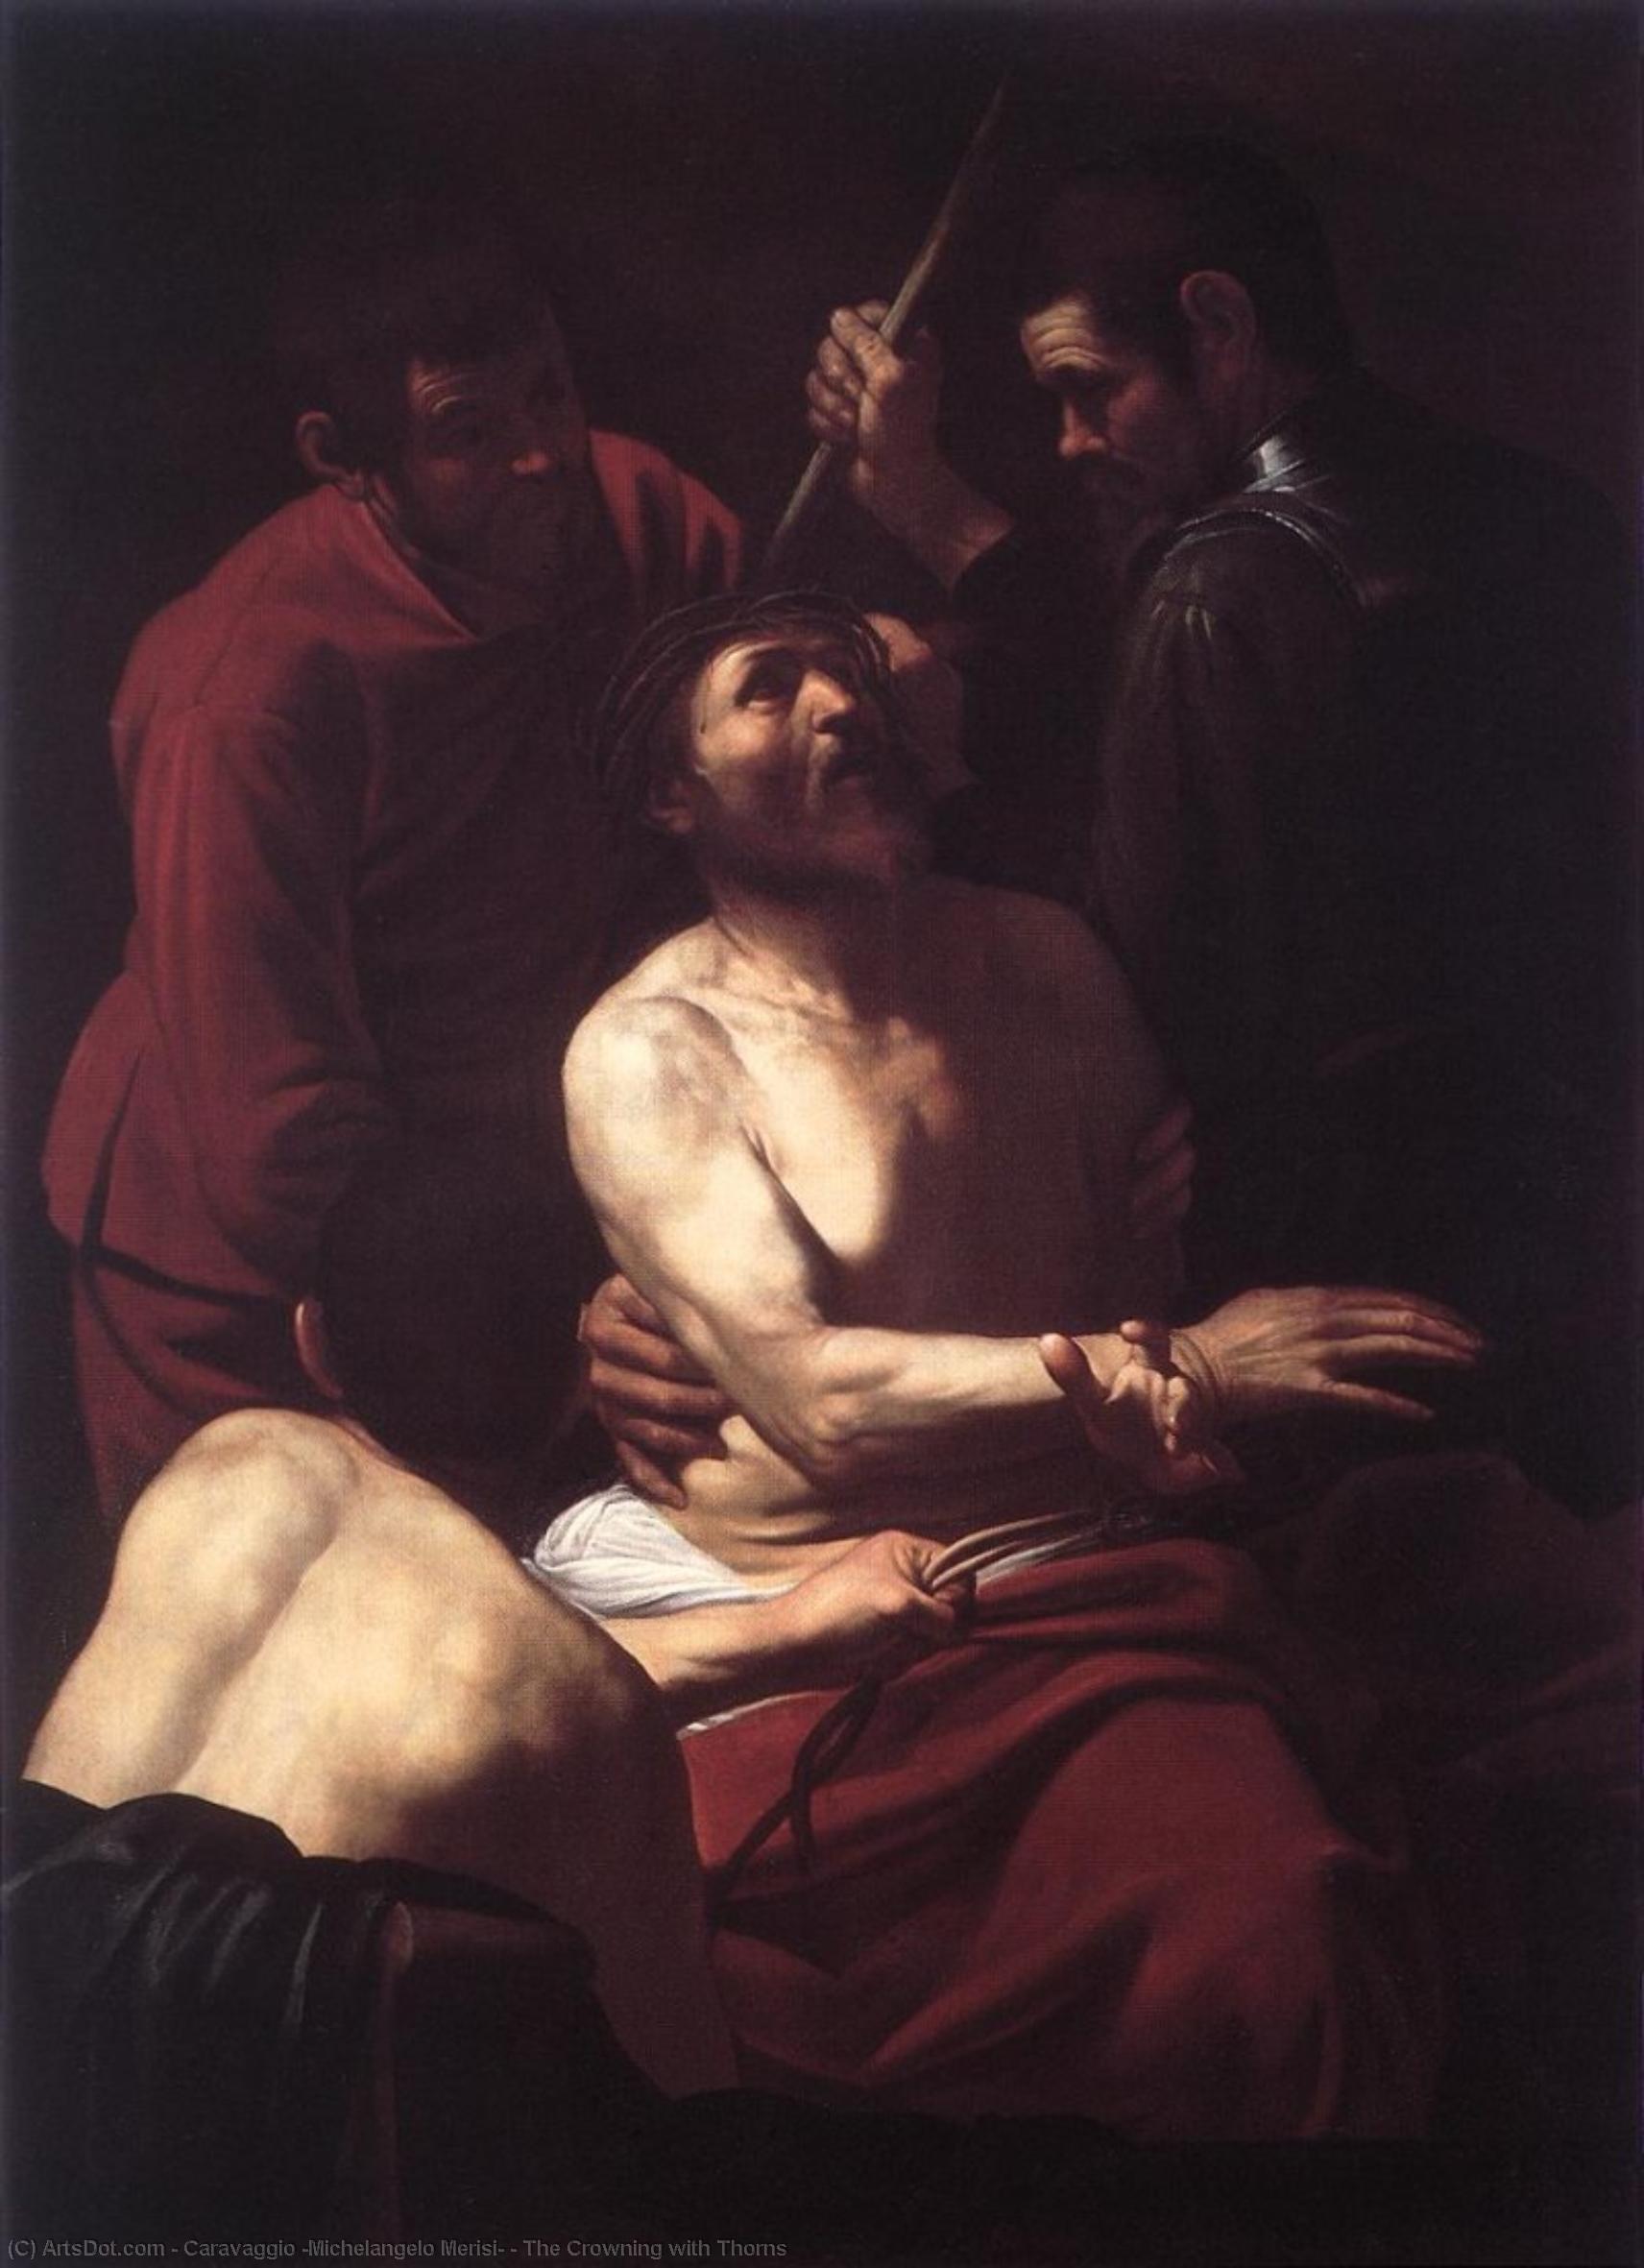 WikiOO.org - Encyclopedia of Fine Arts - Malba, Artwork Caravaggio (Michelangelo Merisi) - The Crowning with Thorns